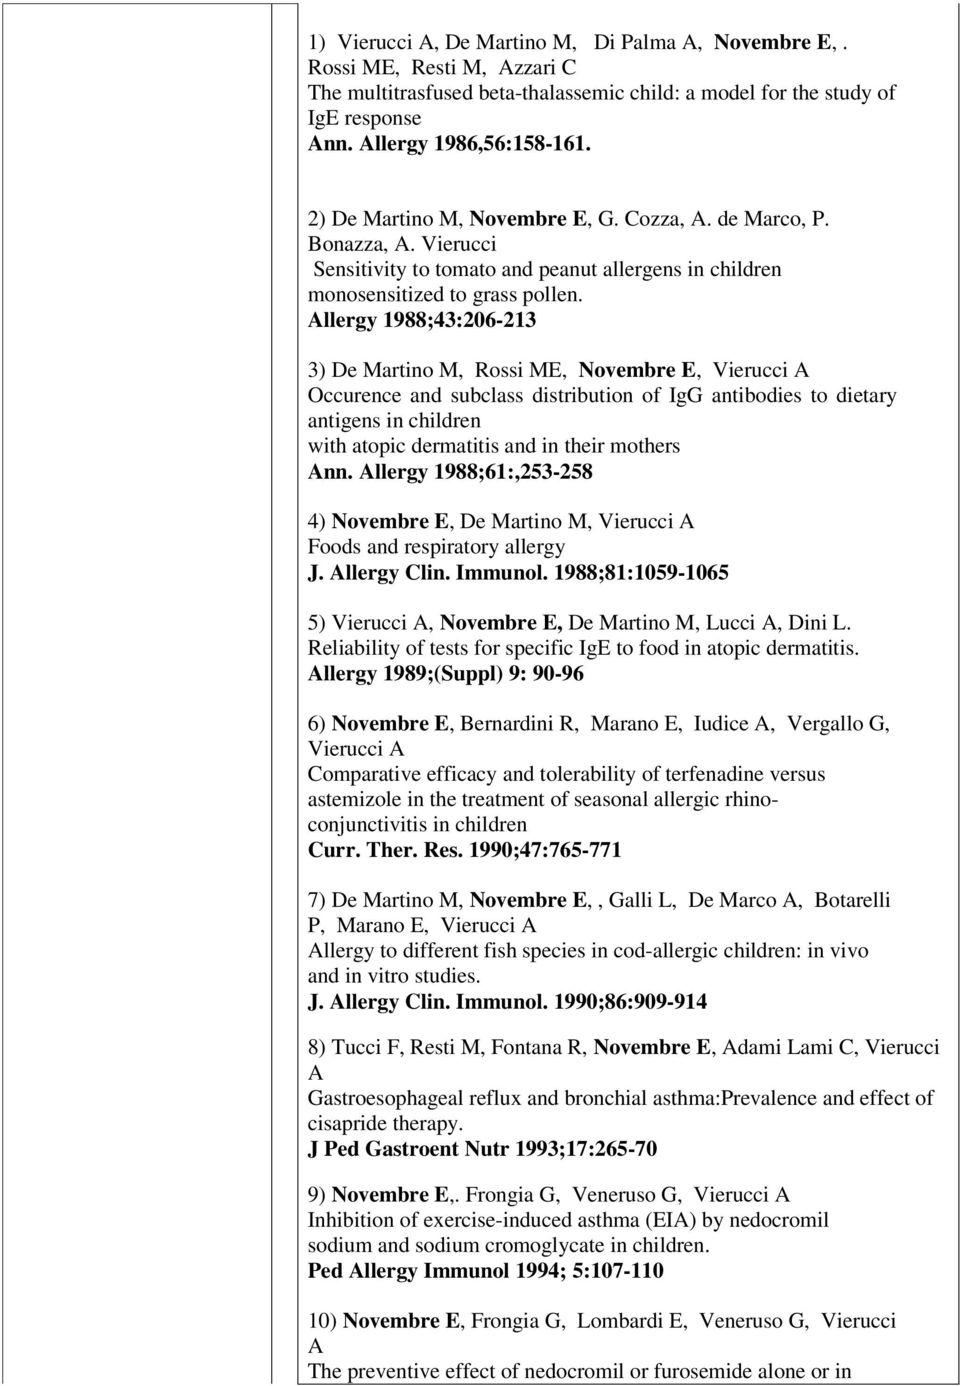 Allergy 1988;43:206-213 3) De Martino M, Rossi ME, Novembre E, Vierucci A Occurence and subclass distribution of IgG antibodies to dietary antigens in children with atopic dermatitis and in their